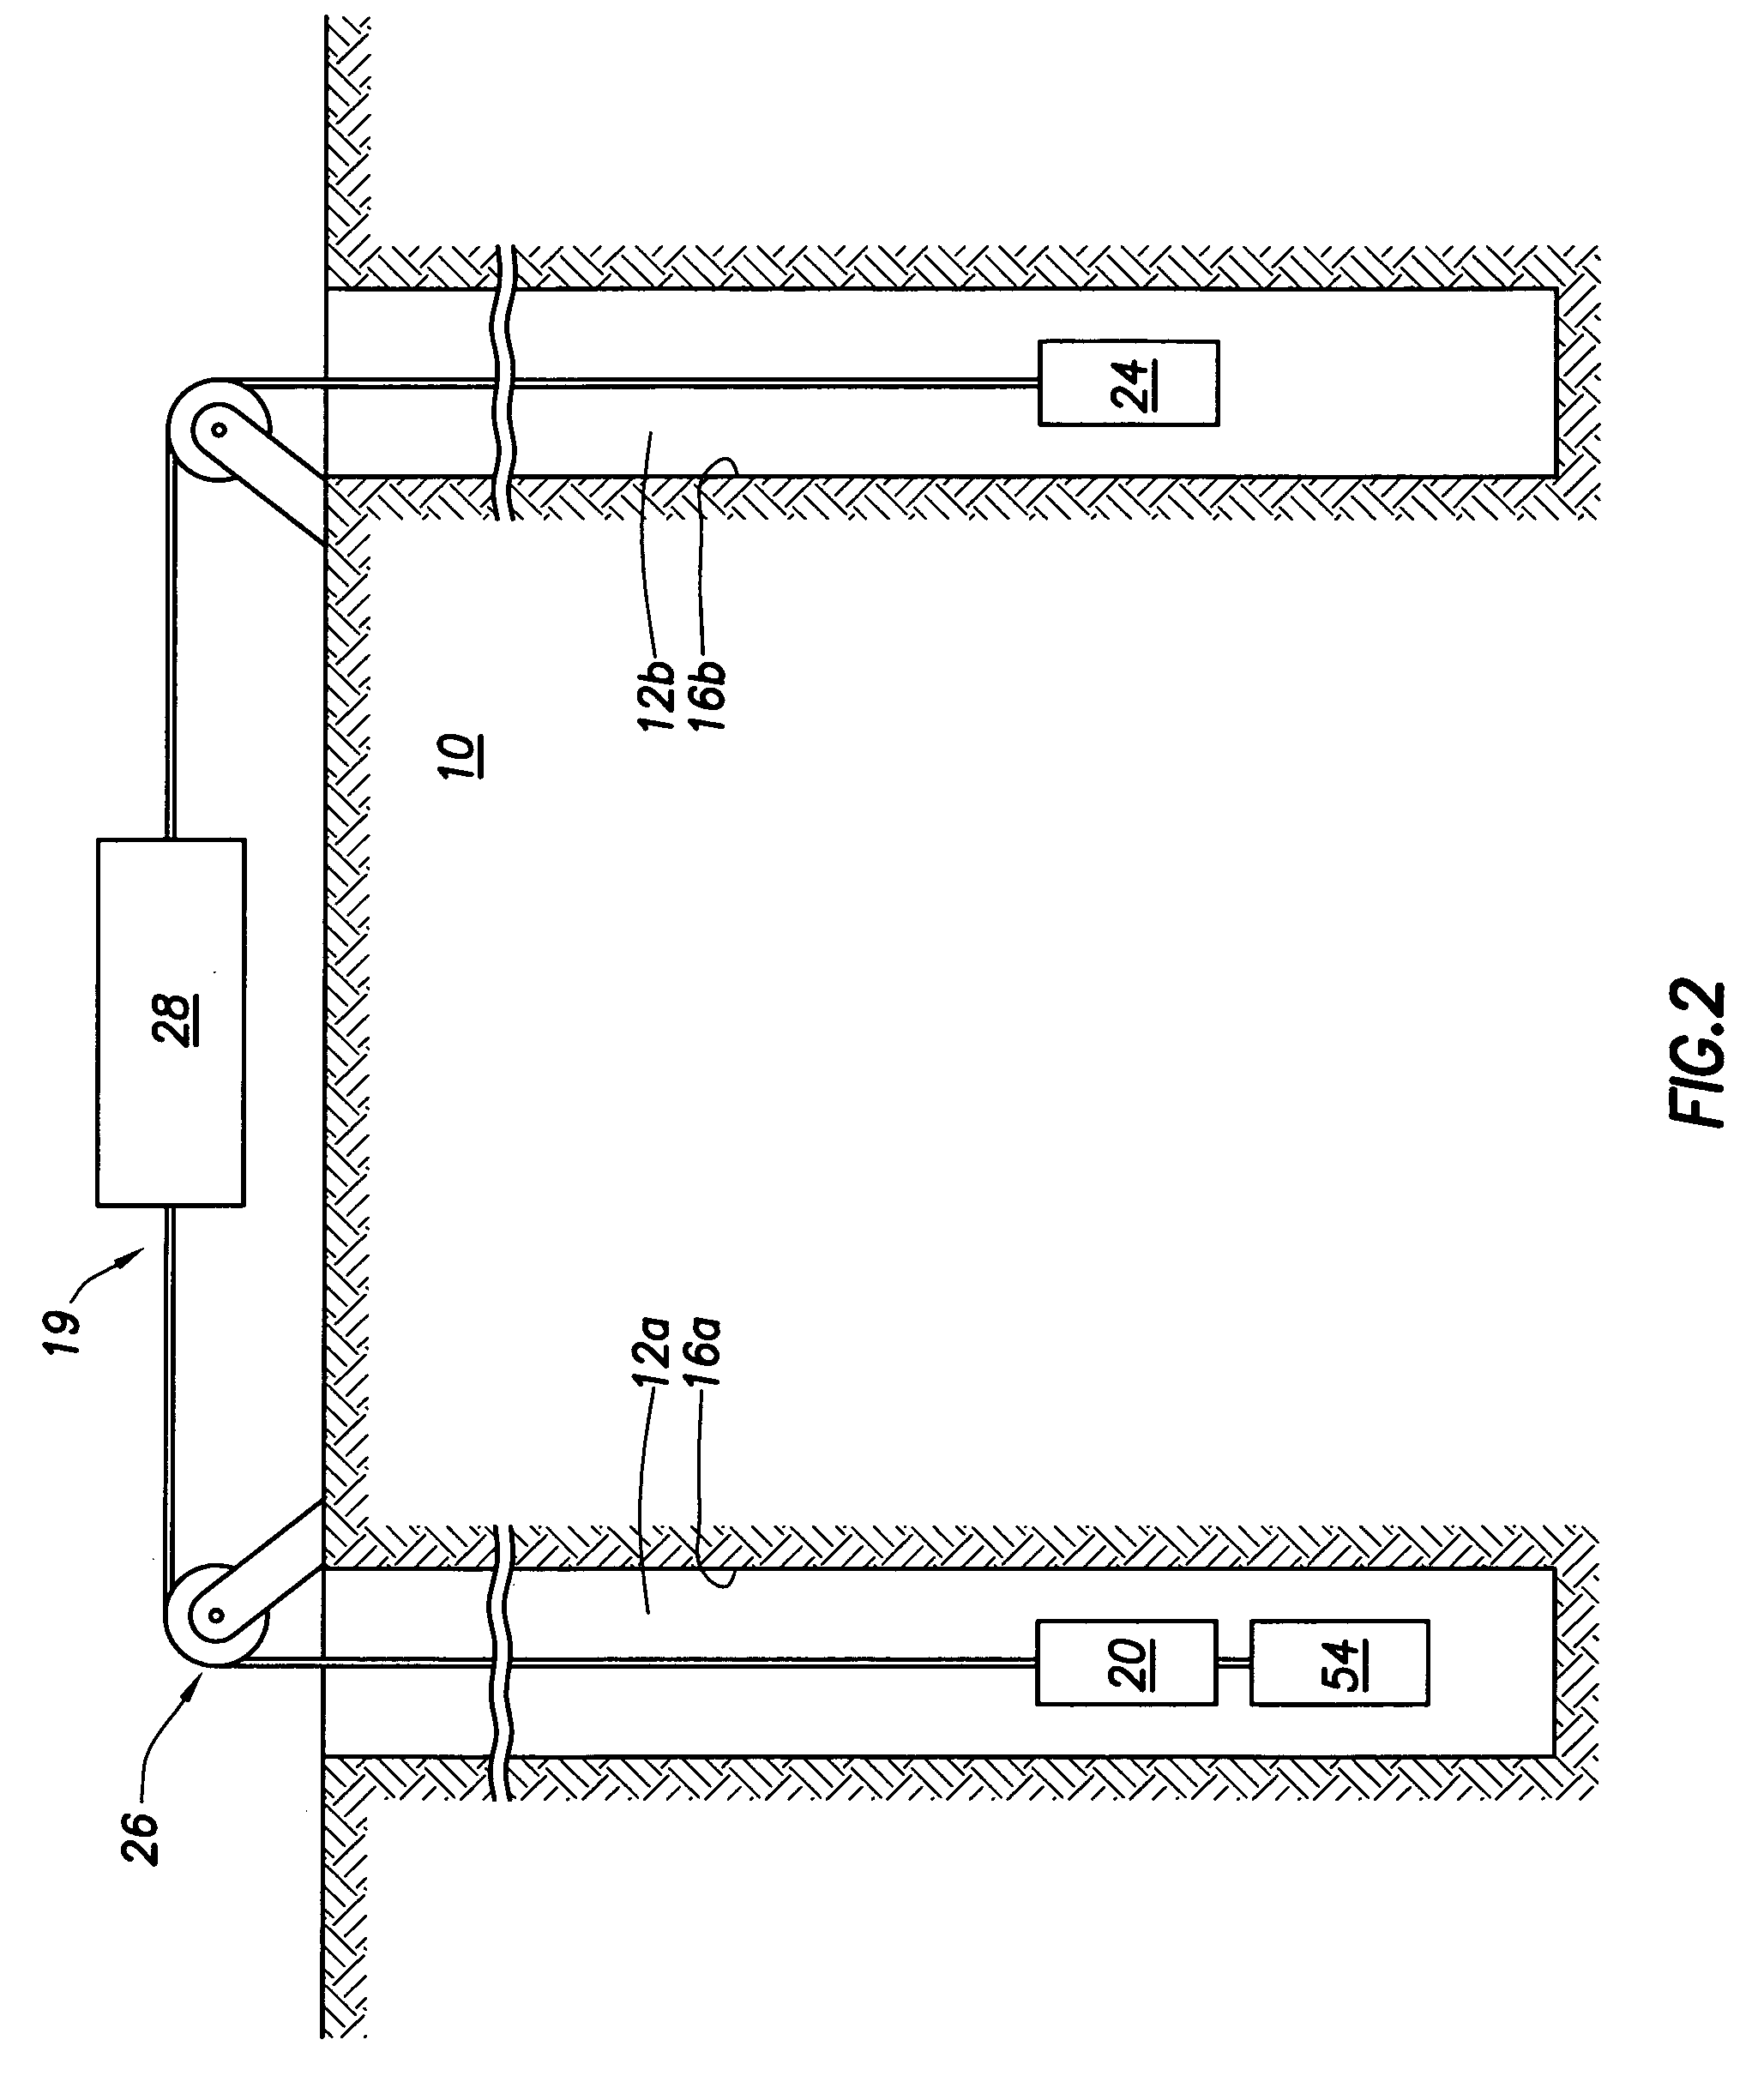 System, apparatus, and method for conducting electromagnetic induction surveys